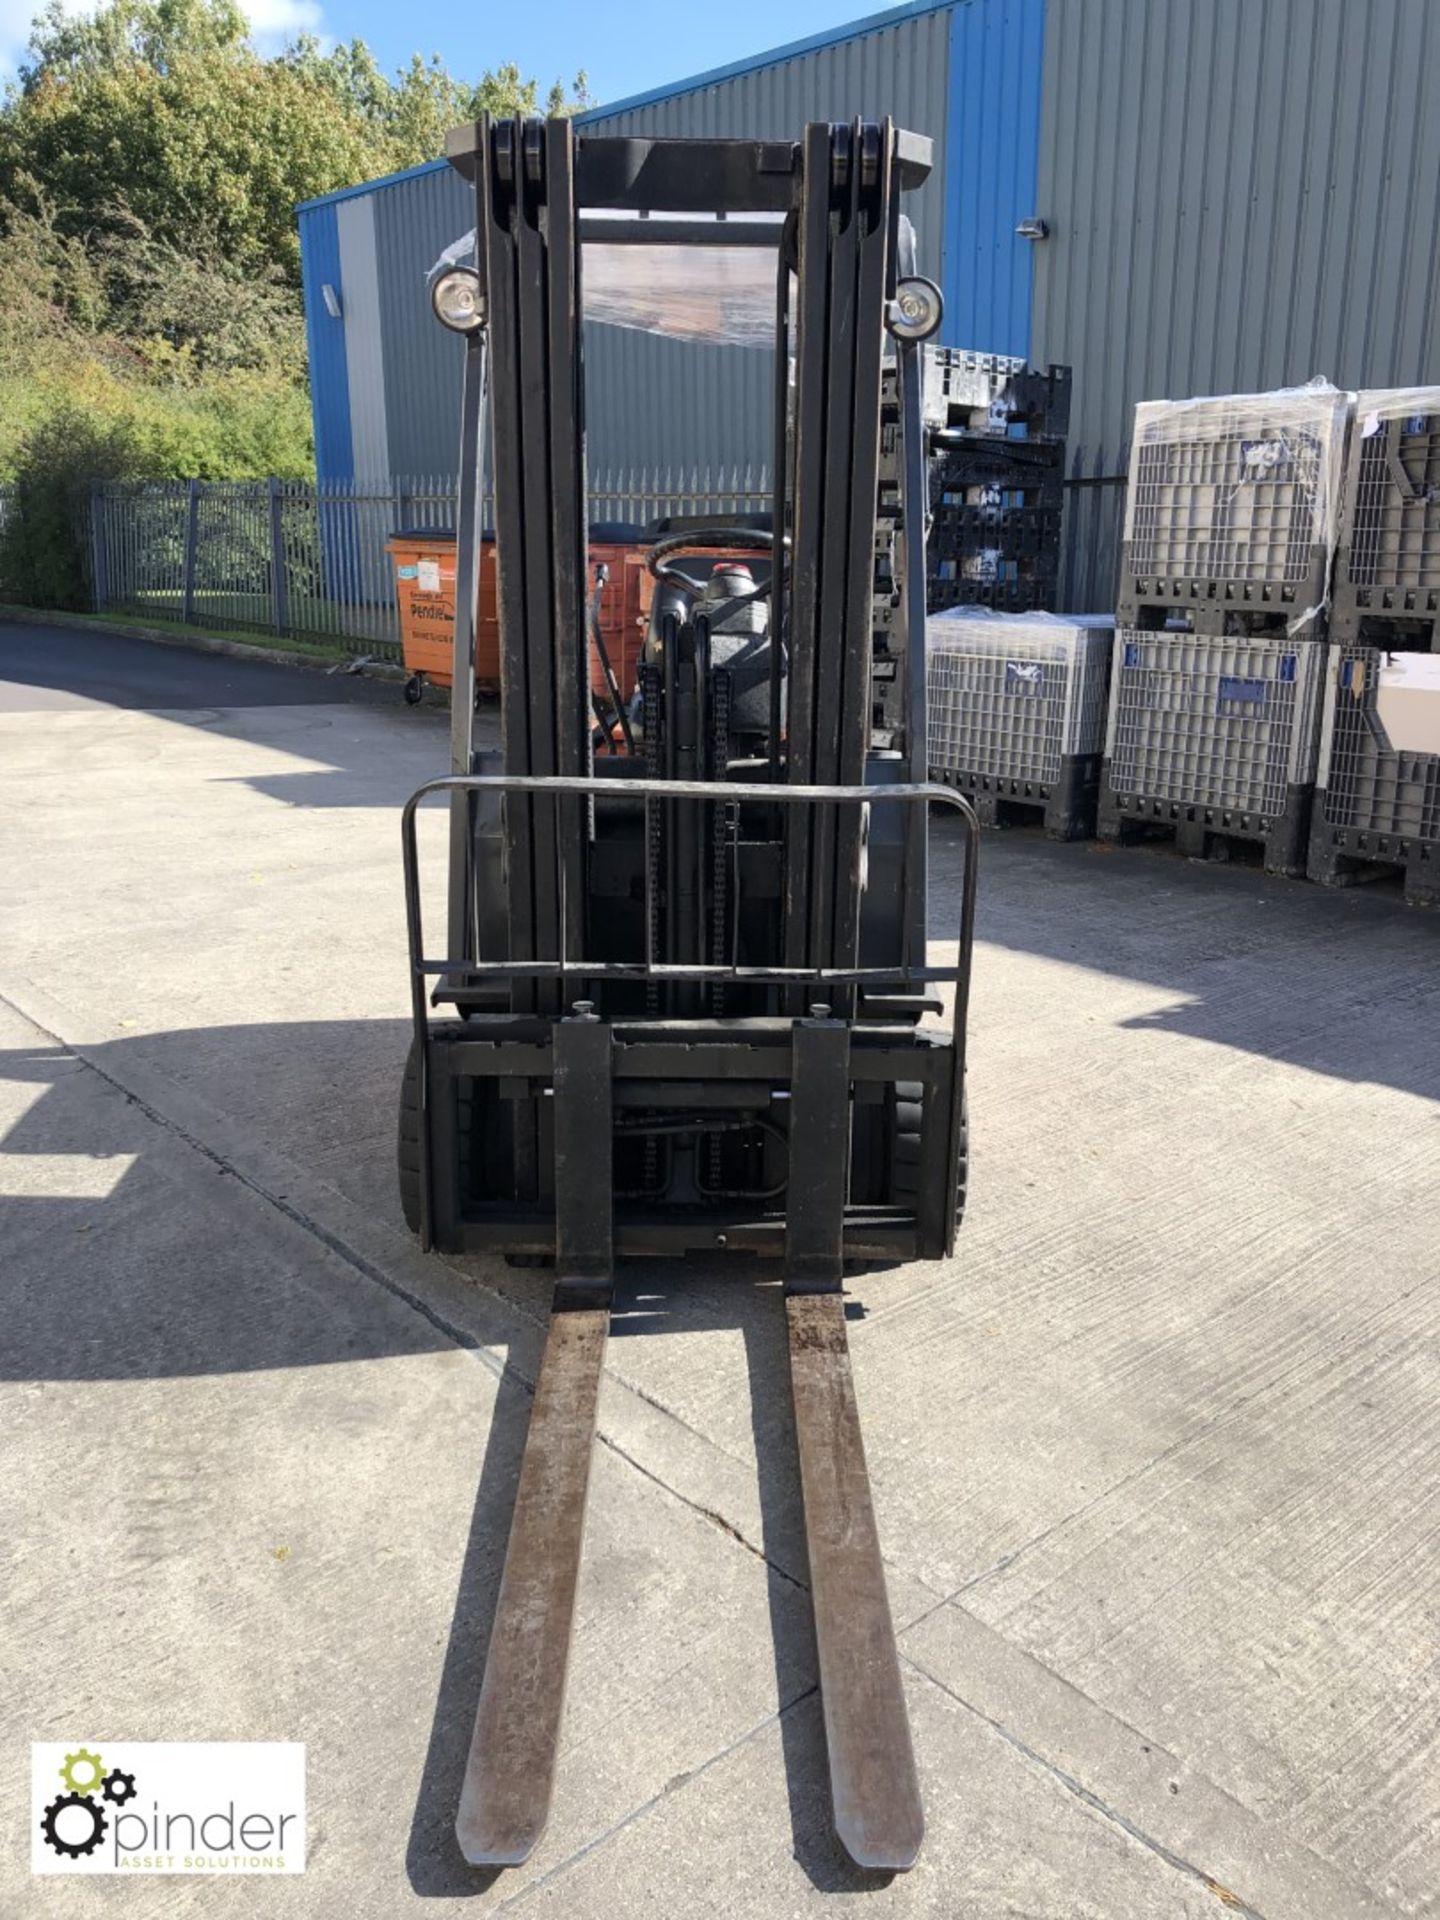 Toyota FBESF 15 3-wheel Electric Forklift Truck, 1500kg capacity, 14706hours, triplex clear view - Image 2 of 12